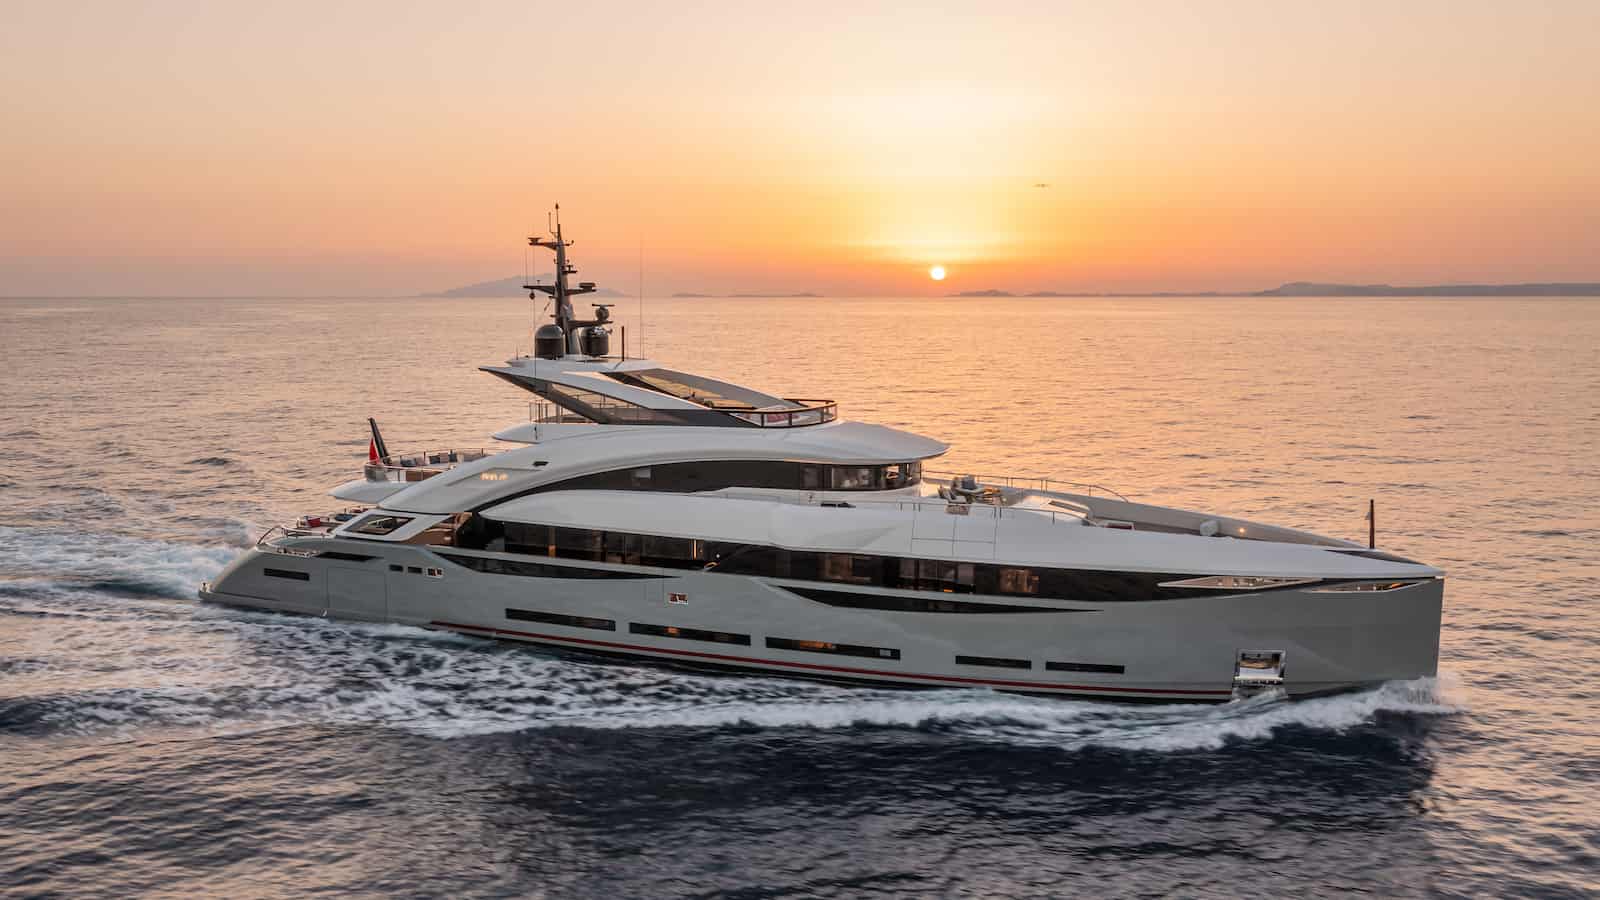 the new 45m yacht| Superyachts News